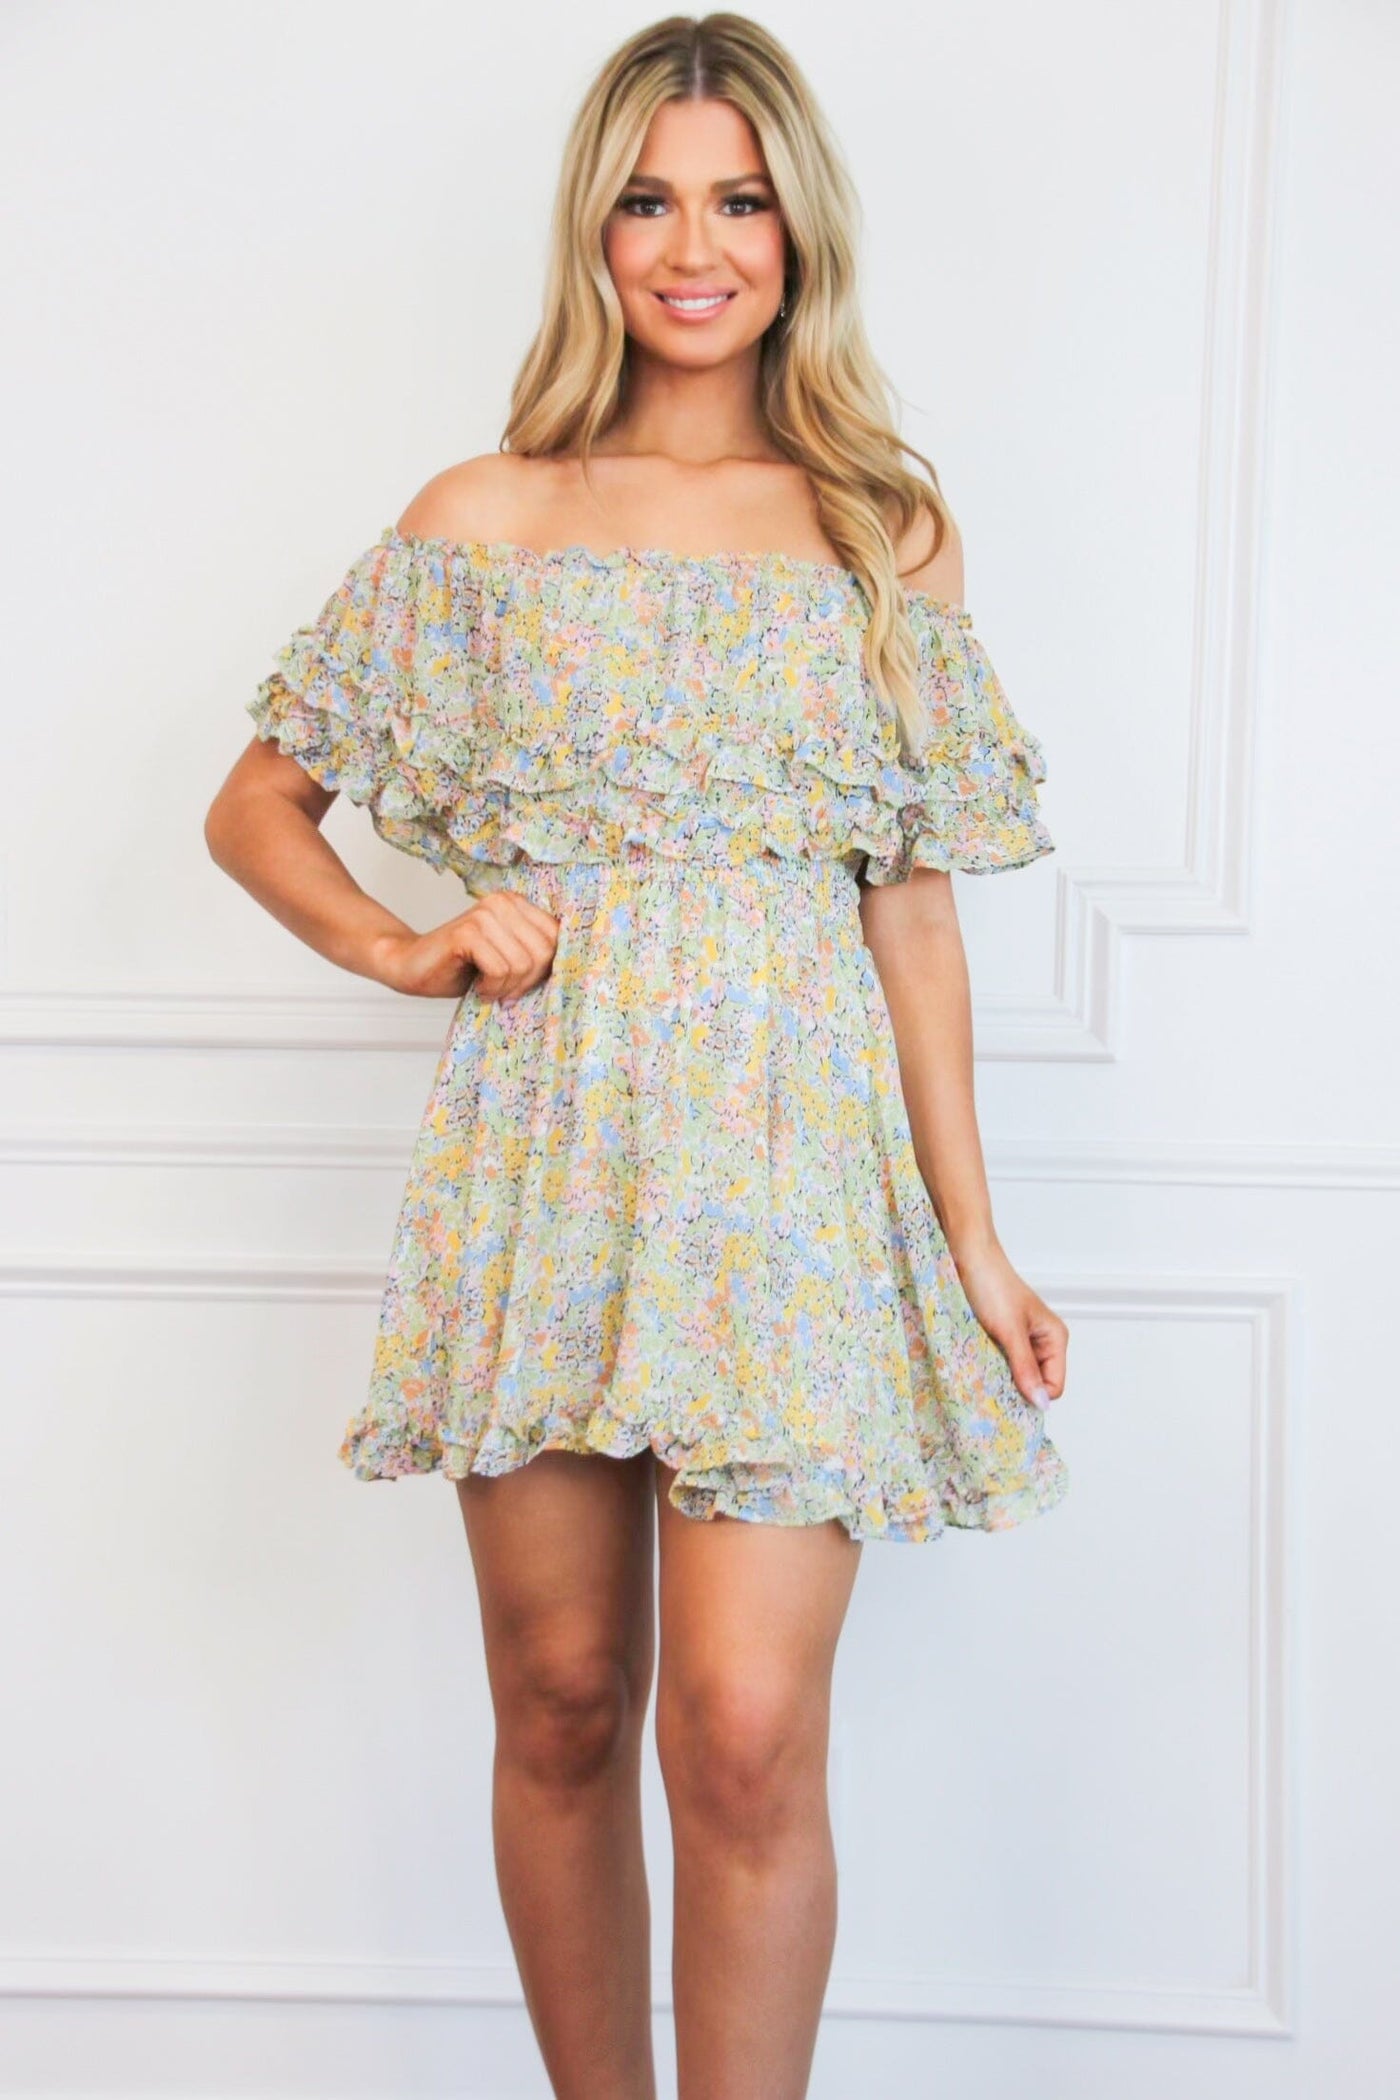 Annie Floral Ruffle Off Shoulder Dress: Yellow/Blue/Green Multi - Bella and Bloom Boutique